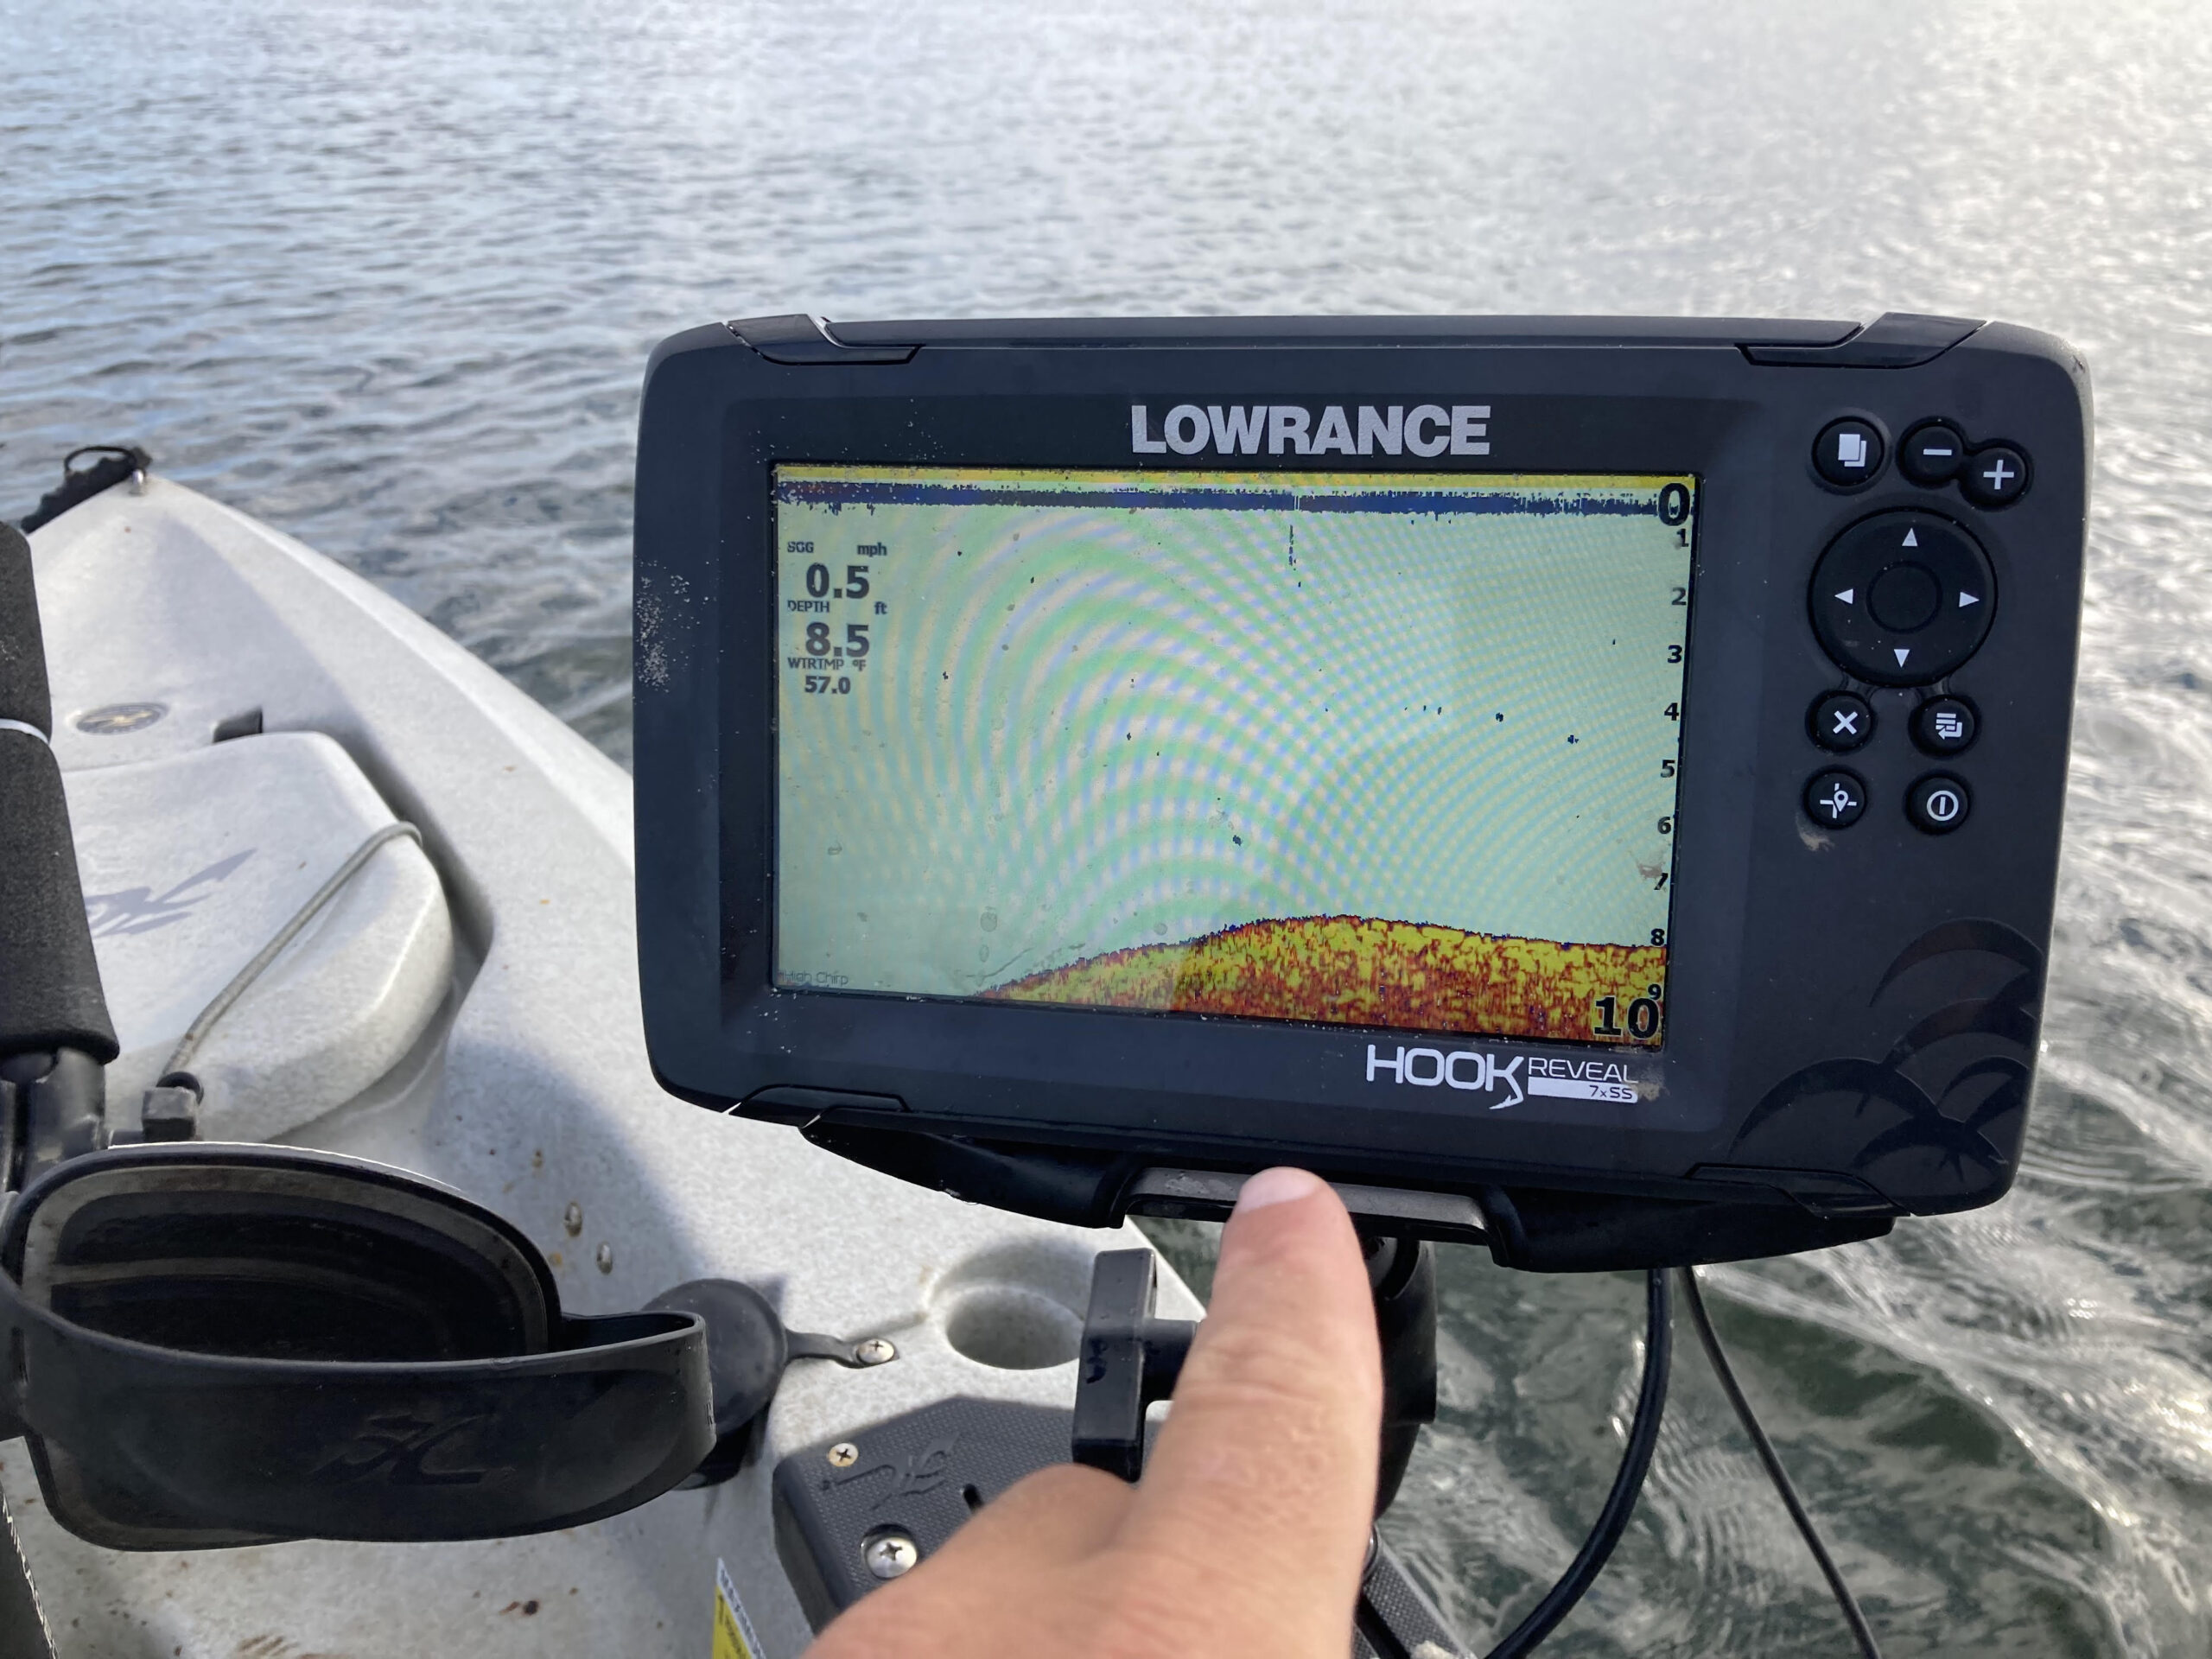 Lowrance HOOK Reveal 7 HDI Combo Device Fishfinder - Black for